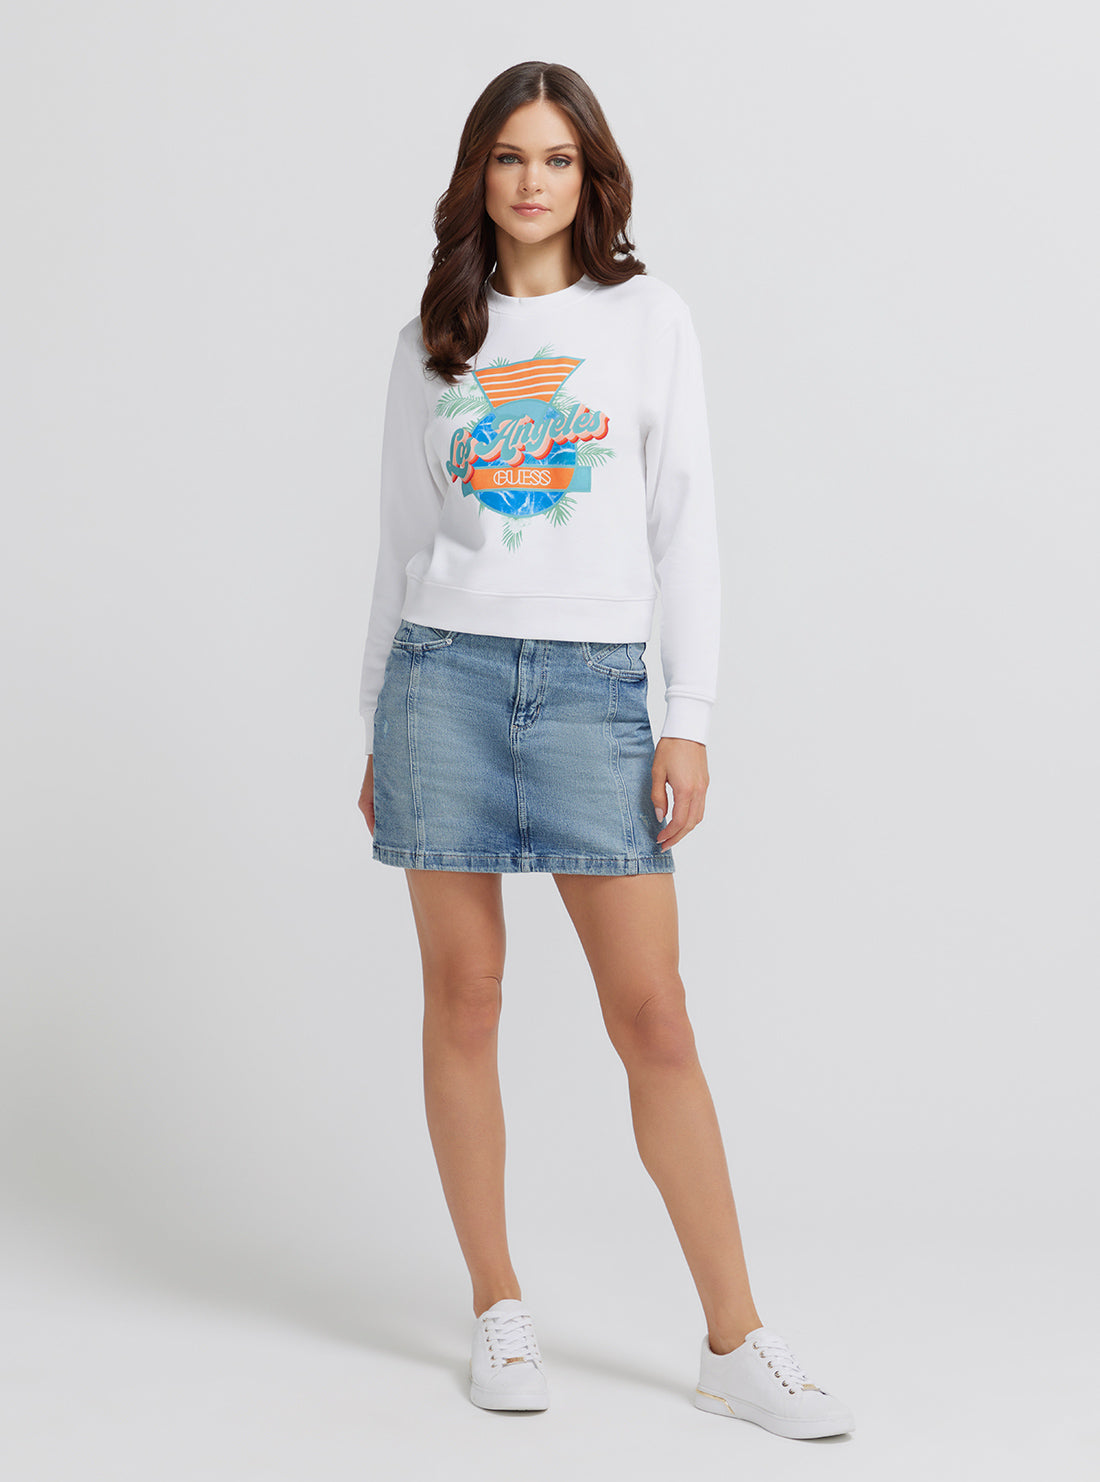 White Los Angeles Logo Jumper | GUESS Women's | Full view